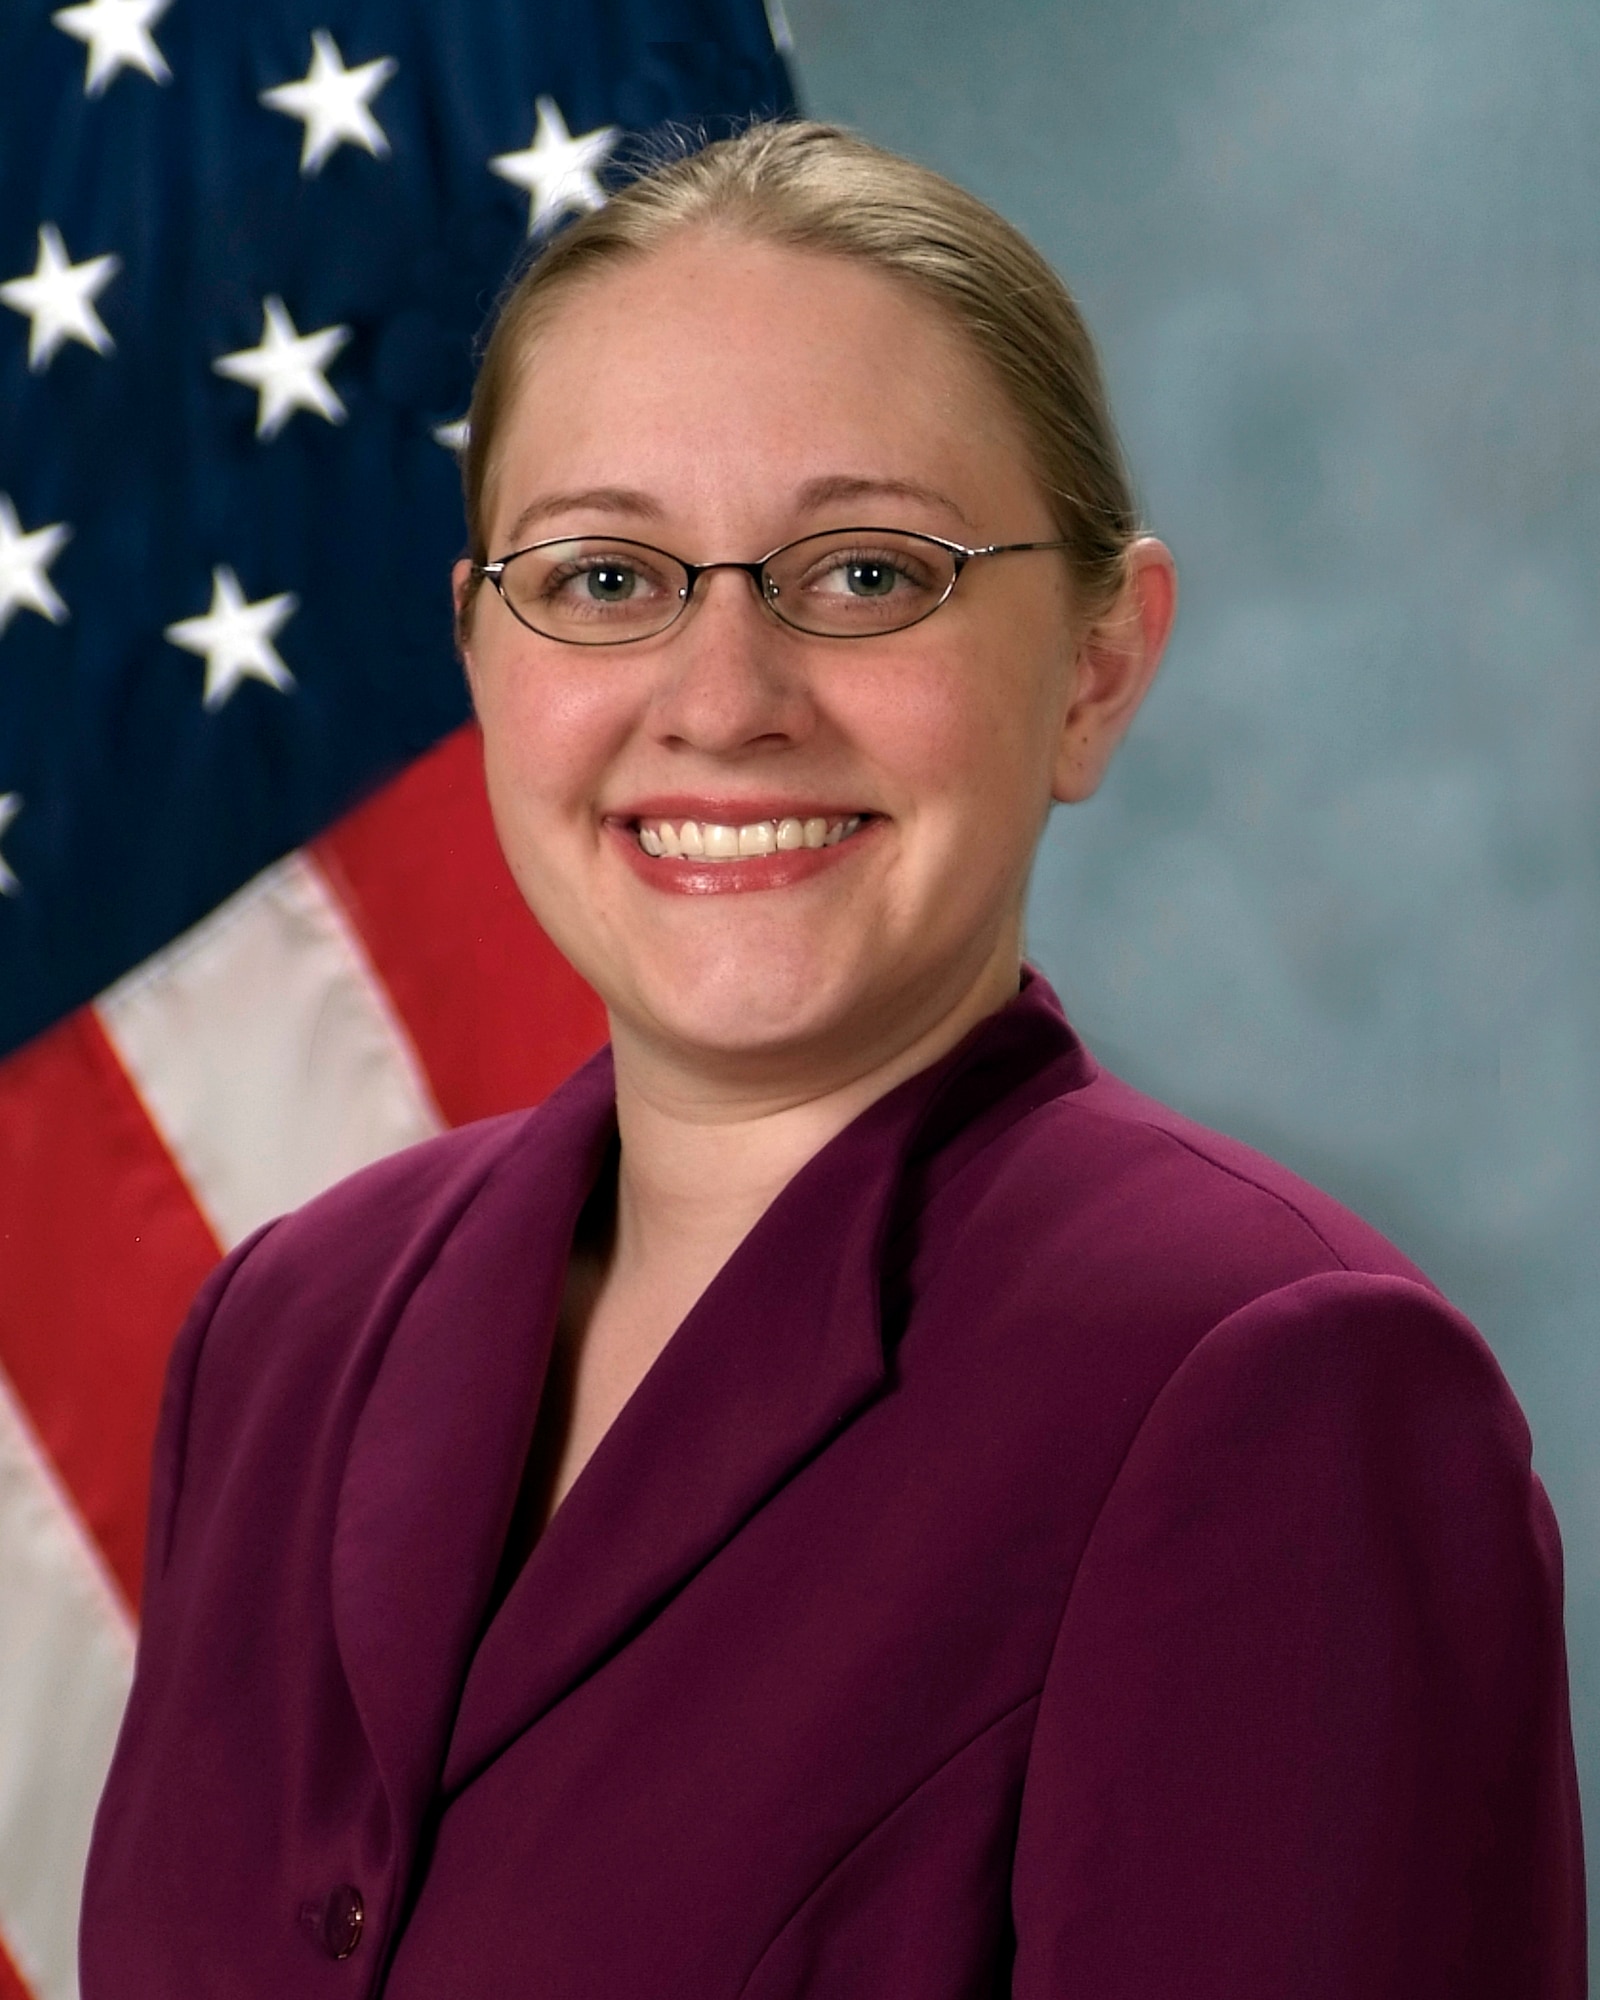 Bethany Campbell, the new flight chief for the Airman and Family Readiness Center, at Hanscom Air Force Base, Mass., has worked for many years as an Air Force civilian employee at positions within the A&FR program. She said her passion is to assist Air Force members, Air Force civilian employees and their families.